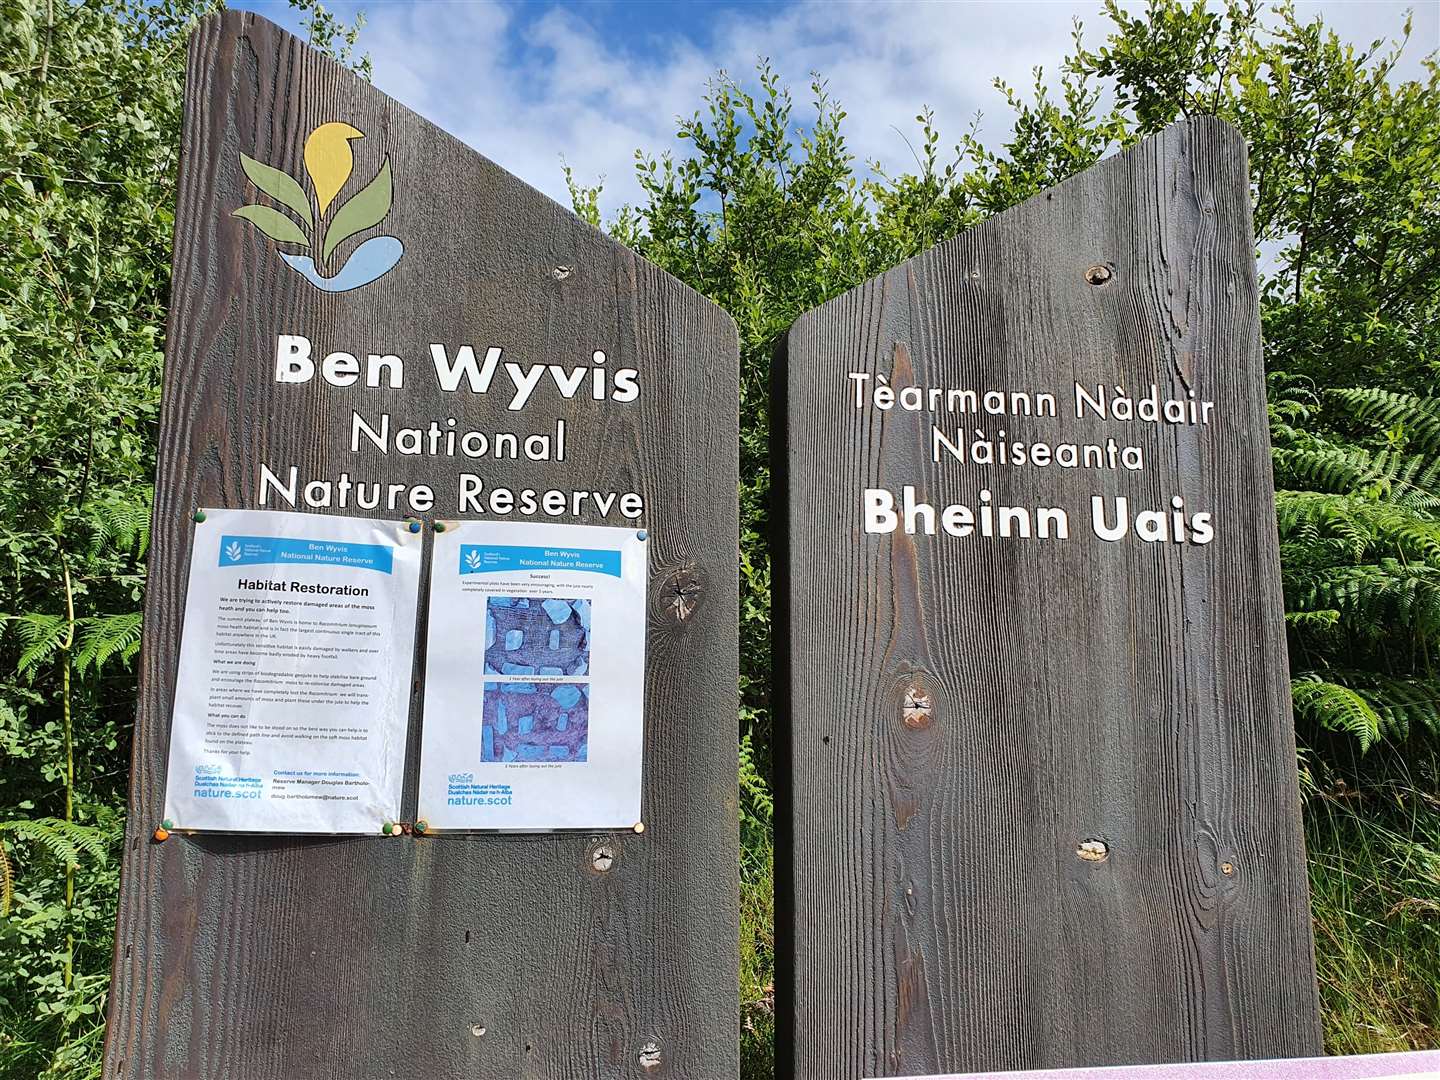 The nature reserve sign at Ben Wyvis.